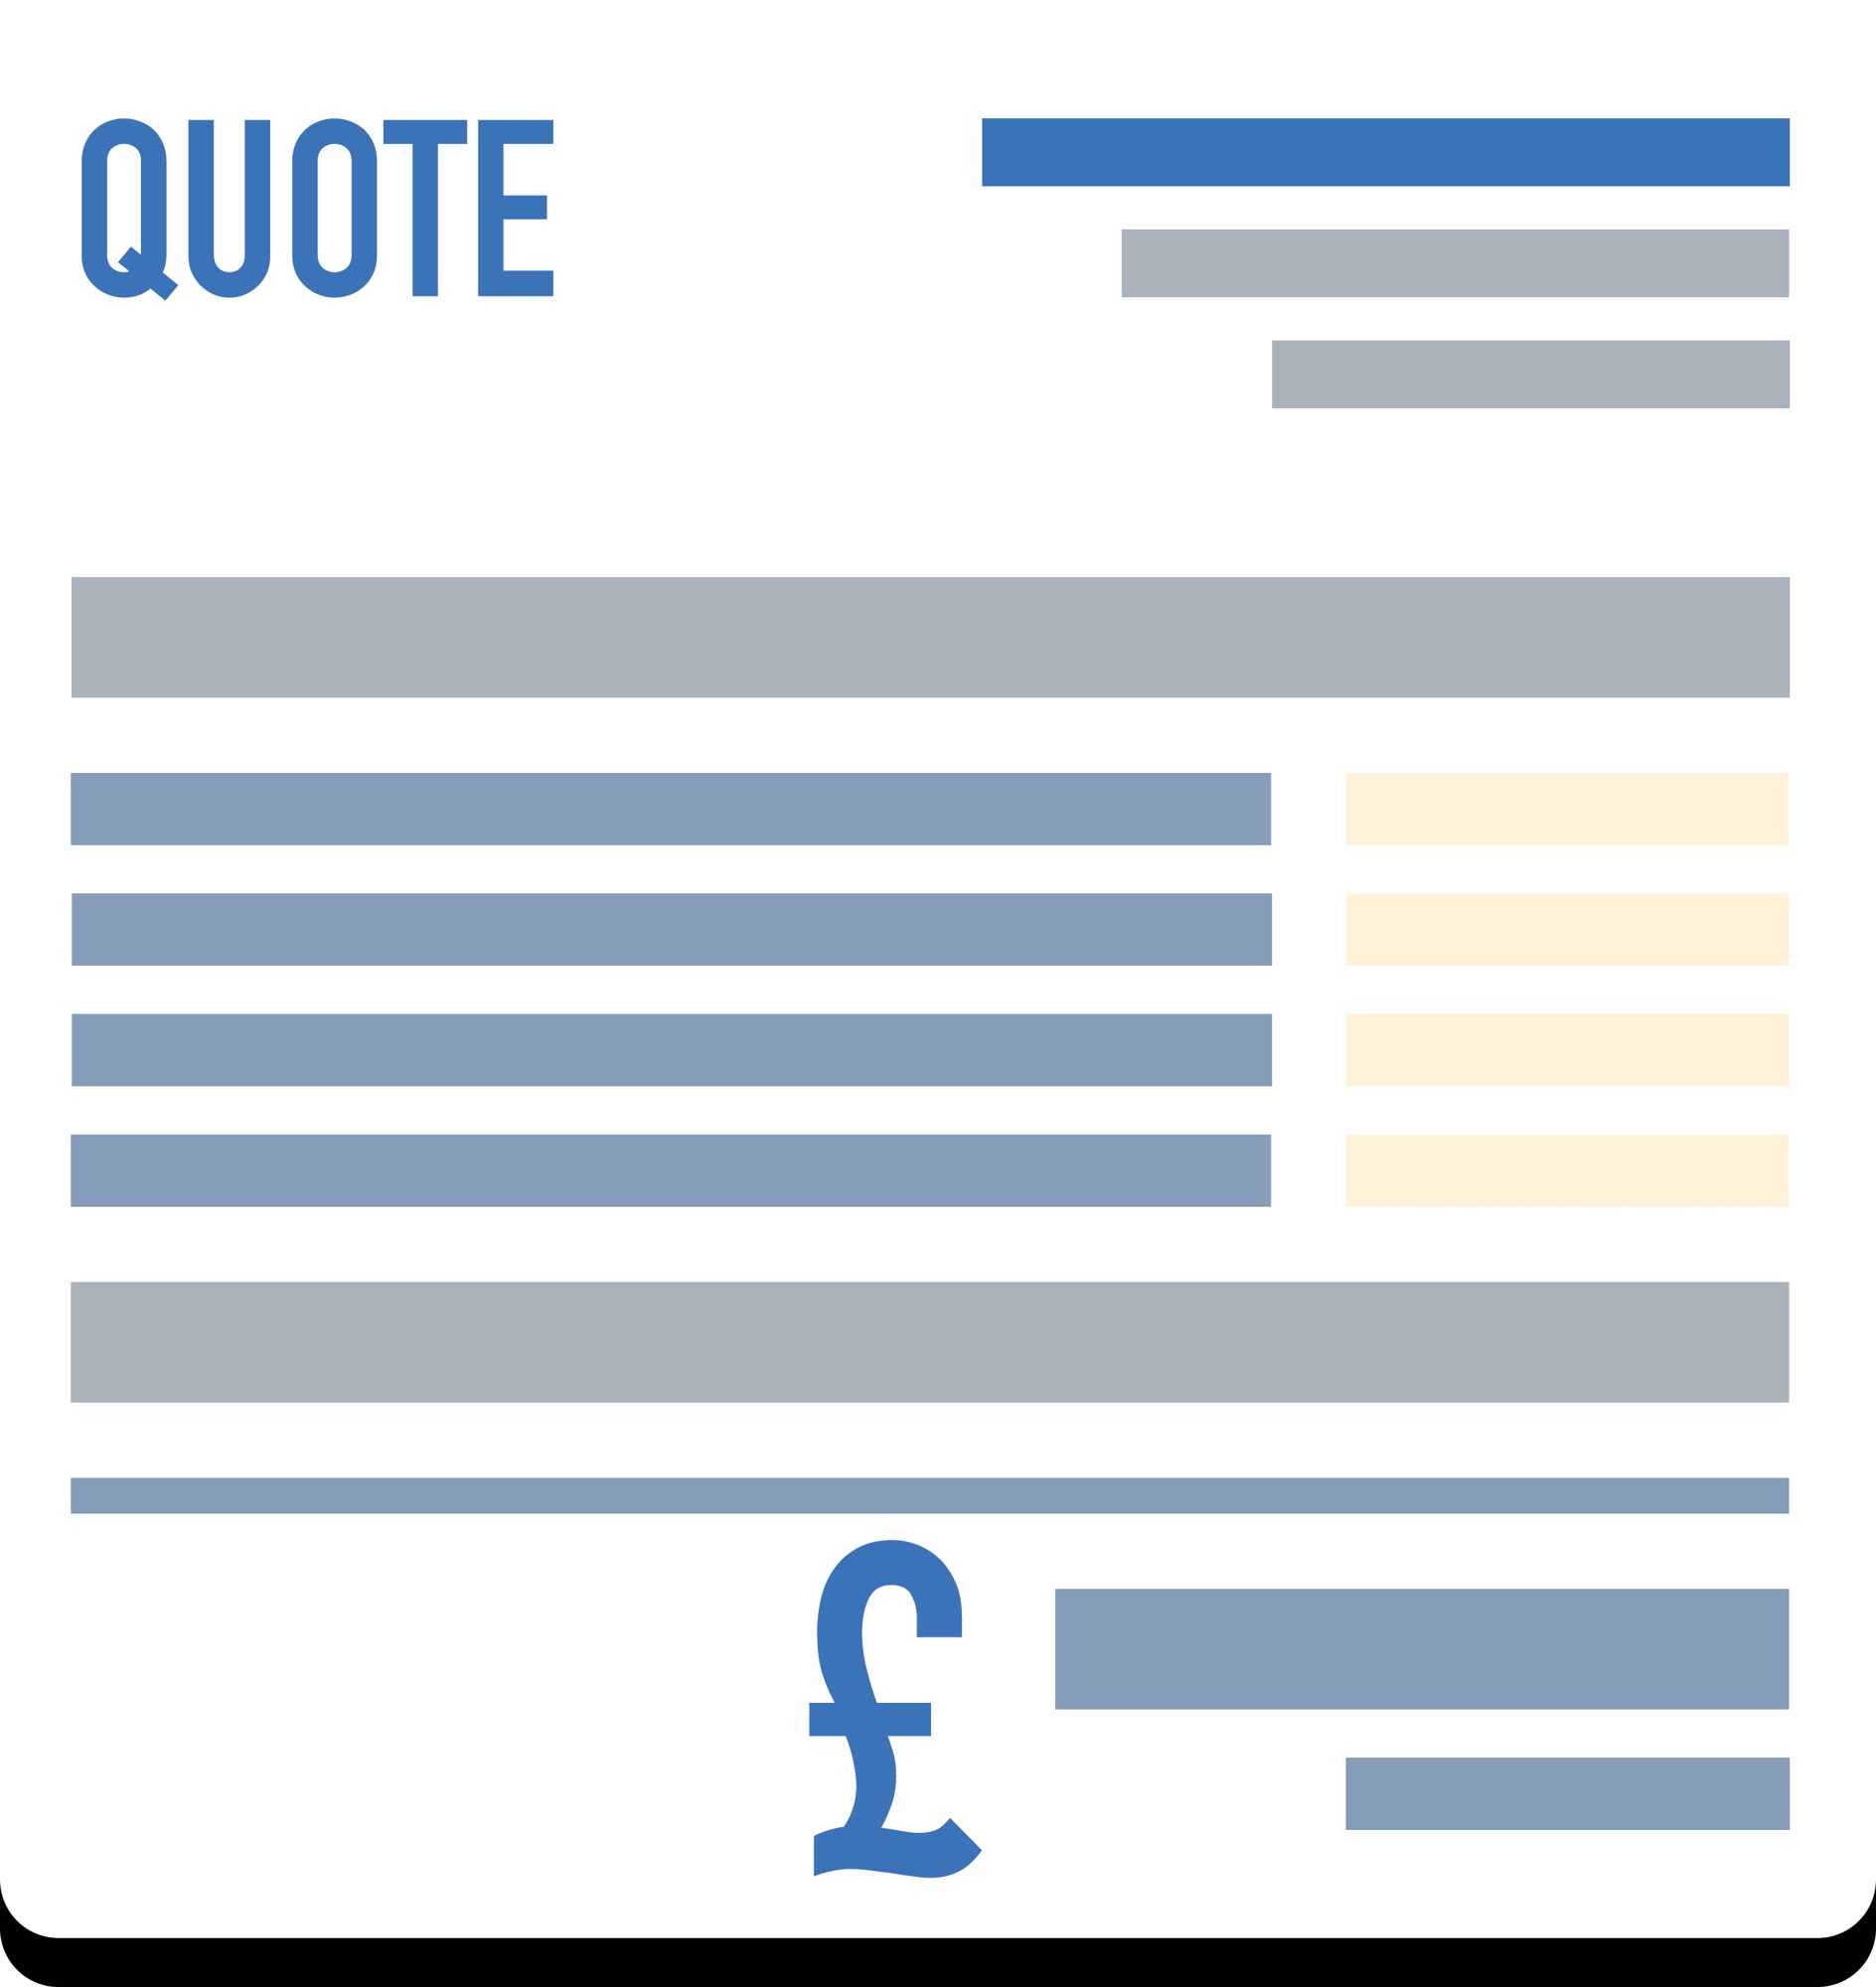 Quote template for electricians